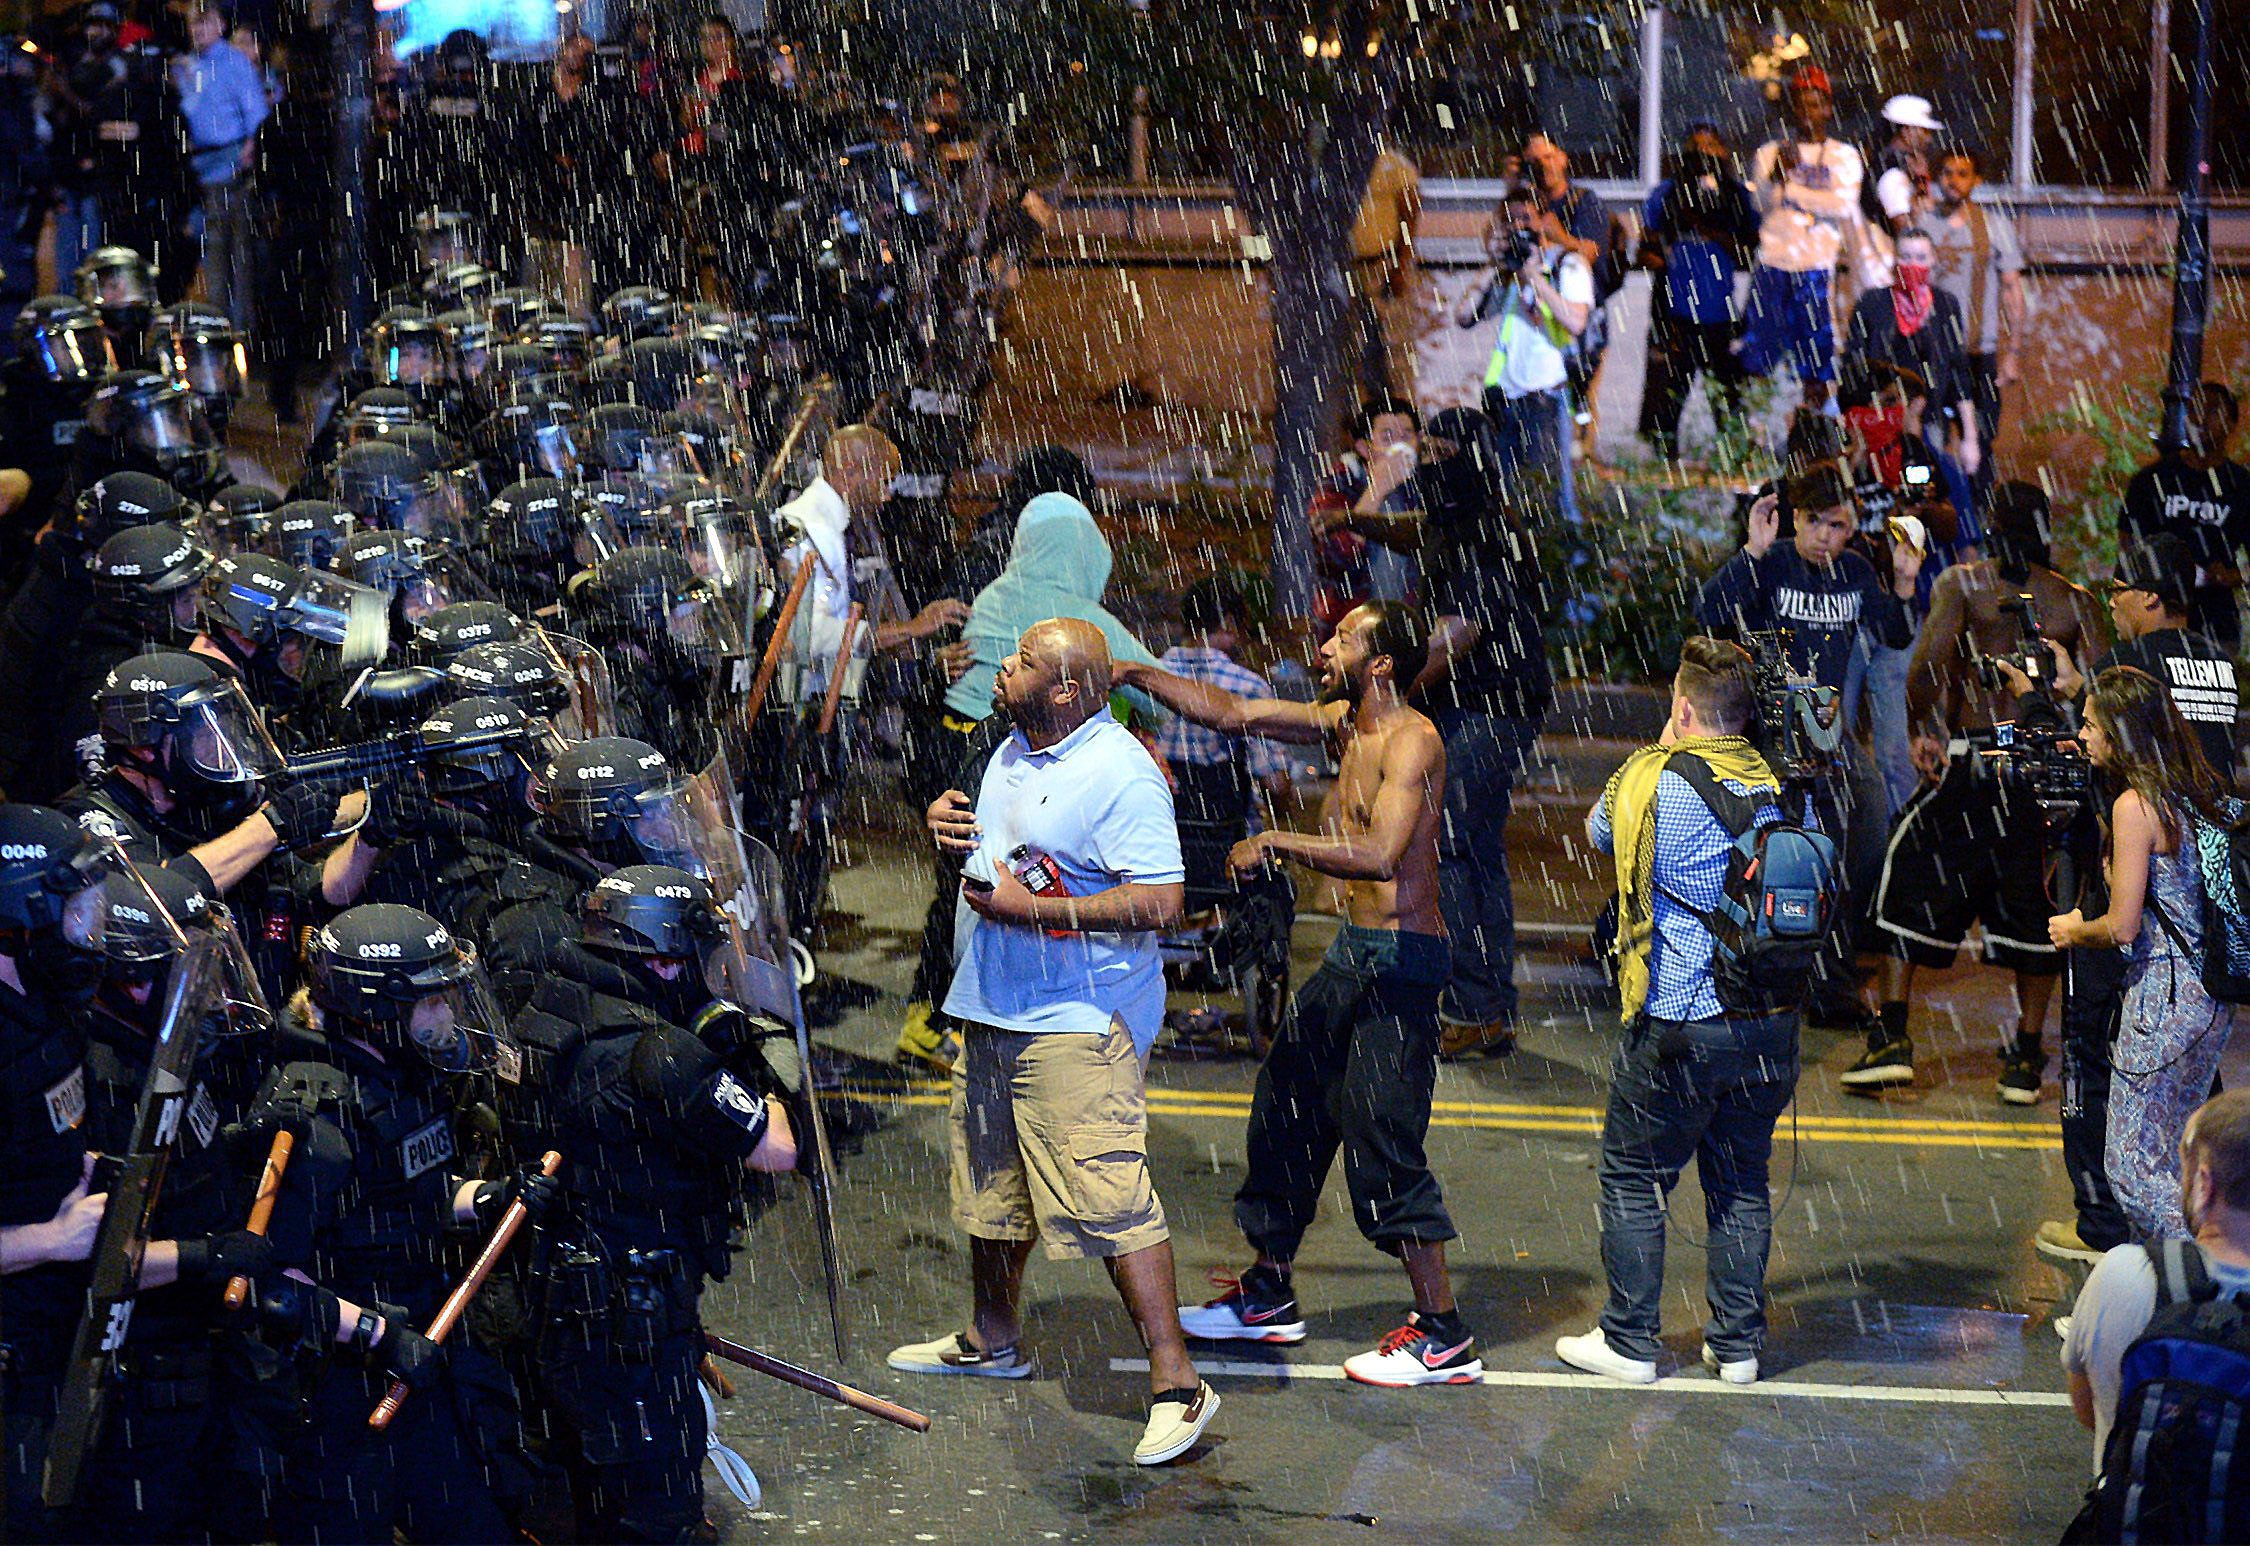 Debris falls upon police officers and protesters as officers began to push protesters from the intersection in Charlotte, N.C. on Sept. 21, 2016.